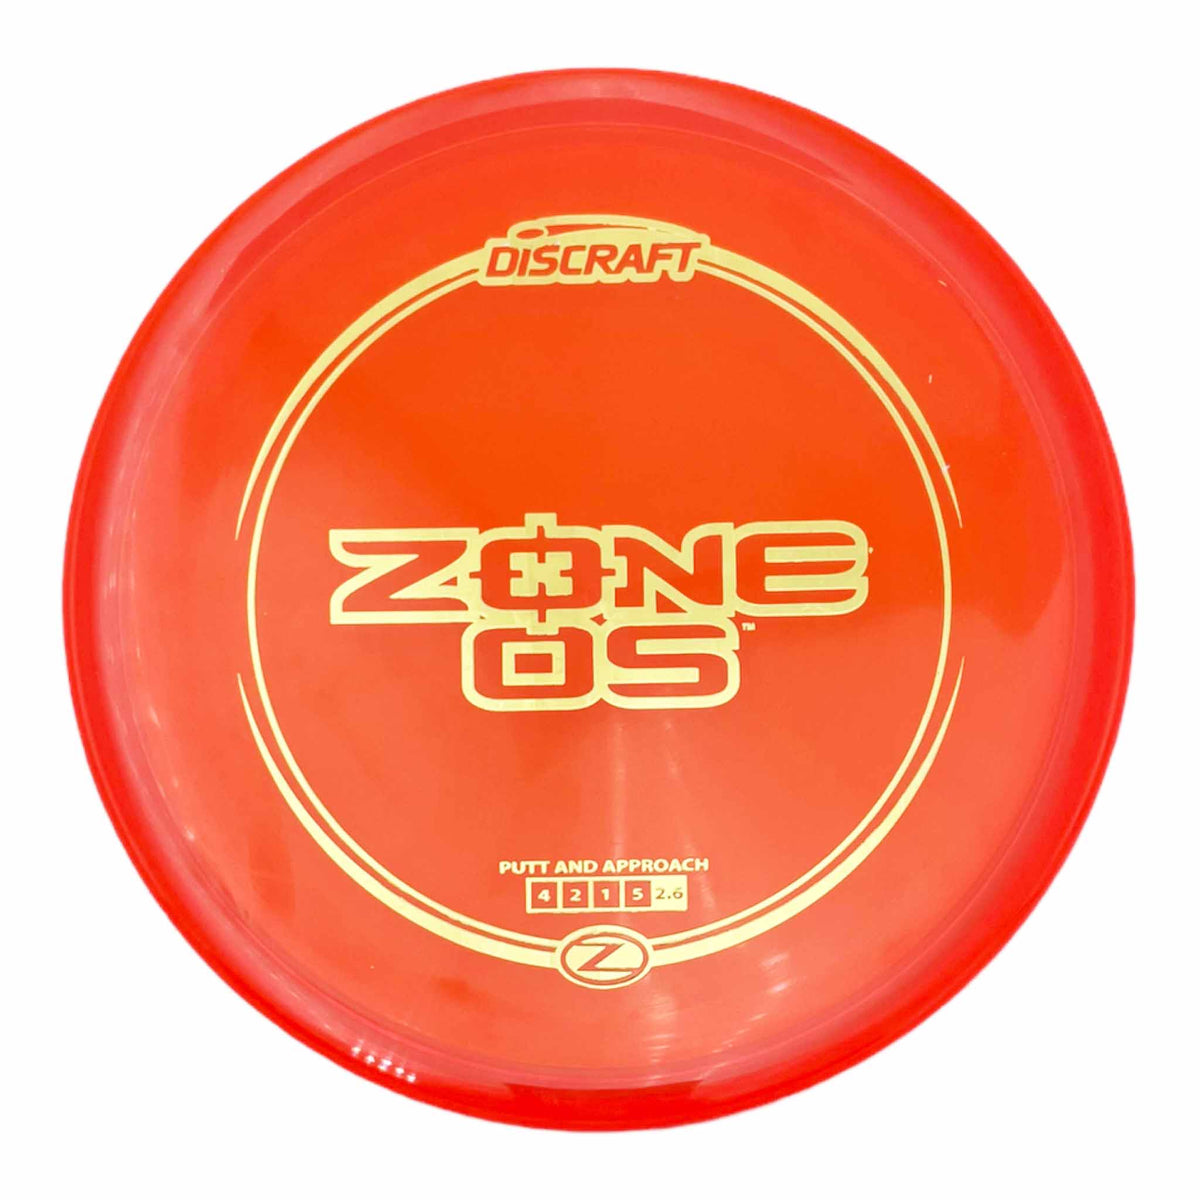 Discraft Z-Line Zone OS putter and approach - Orange / Gold